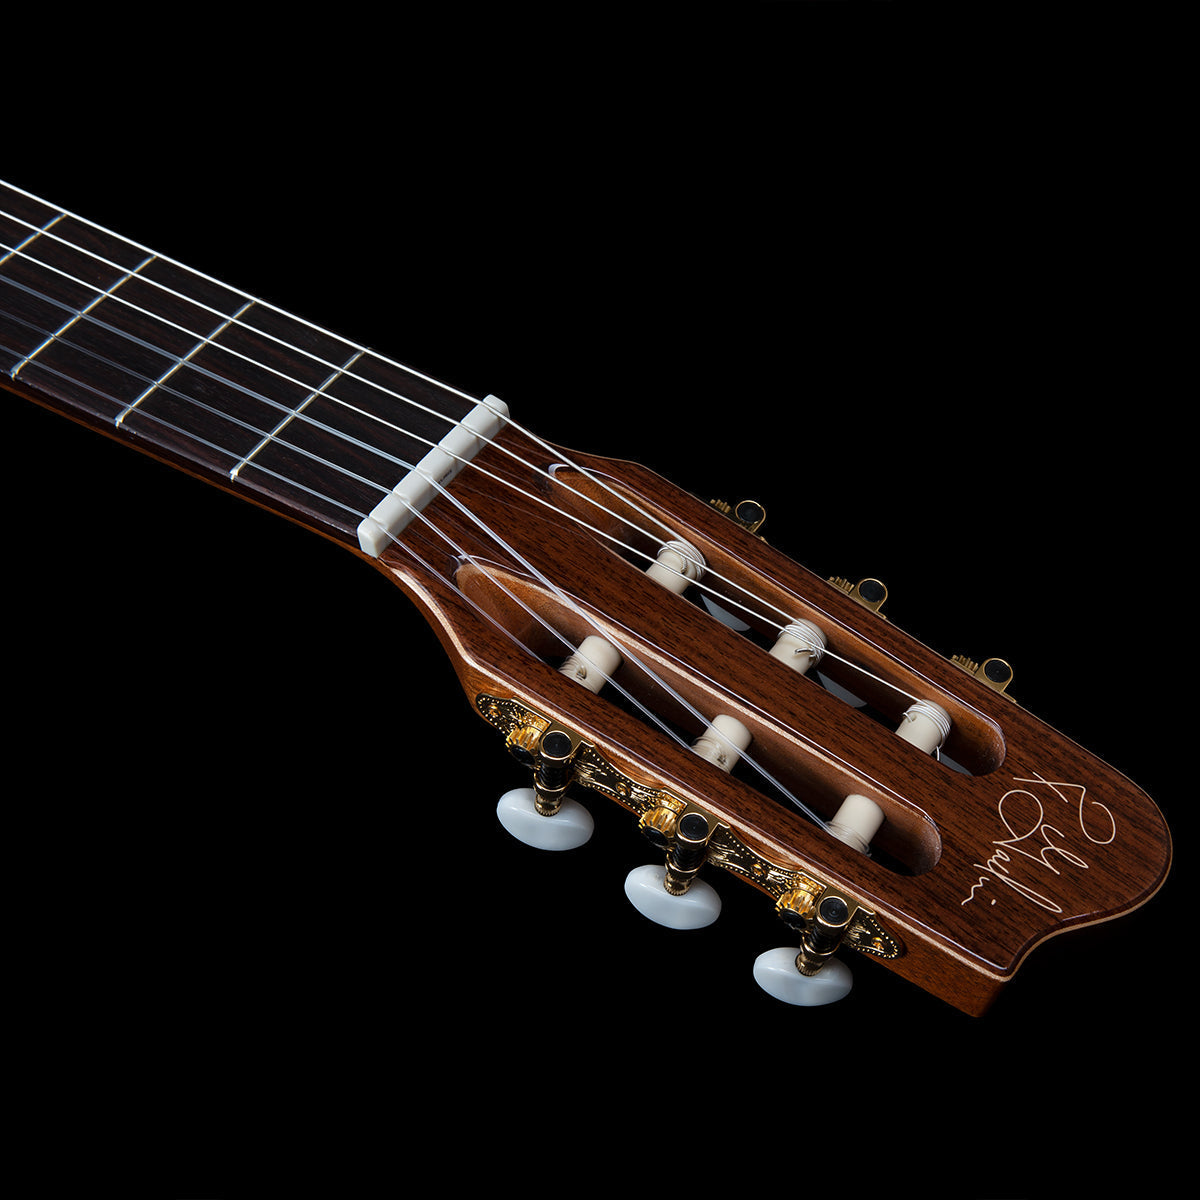 Godin Collection Clasica II Nylon String Electro Guitar,  for sale at Richards Guitars.